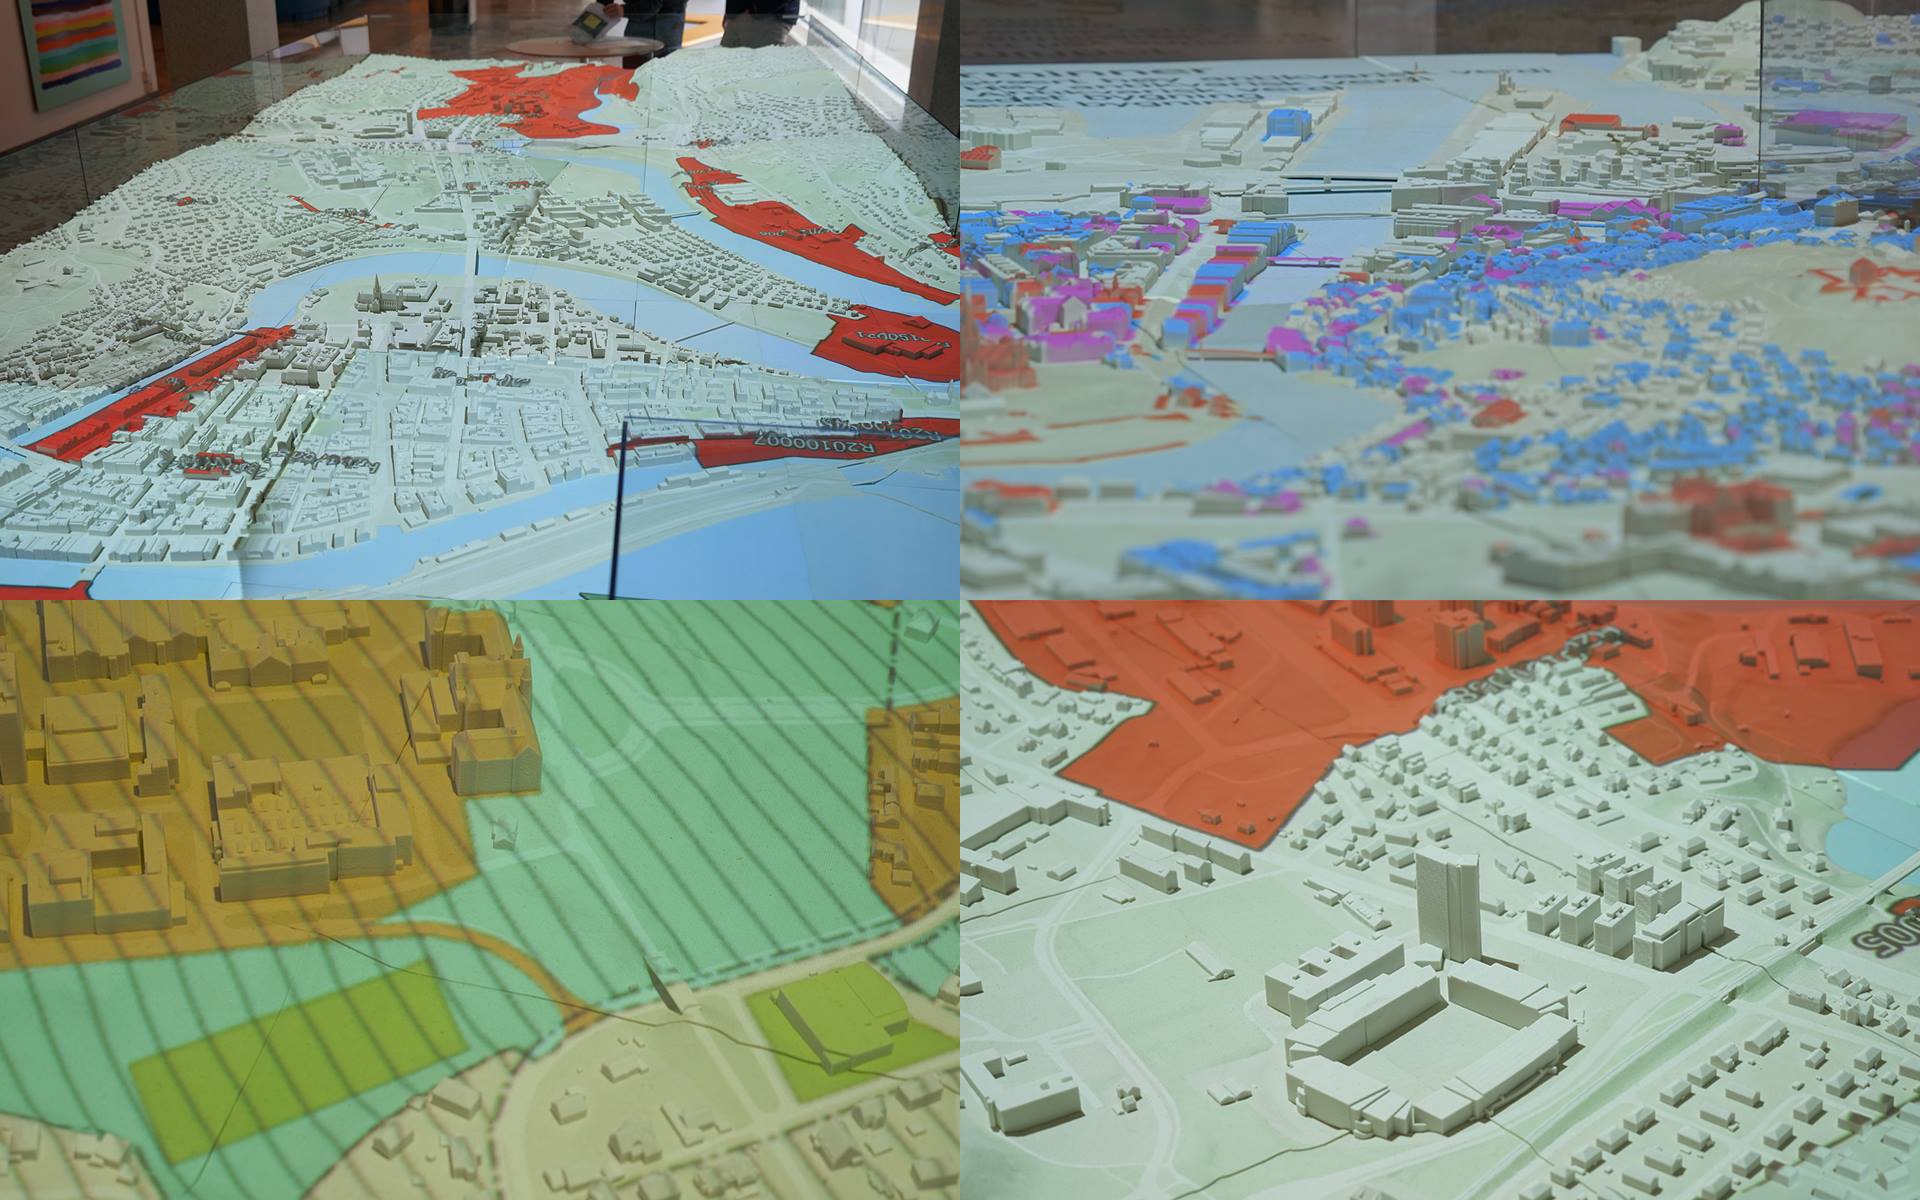 3D mapping of Trondheim